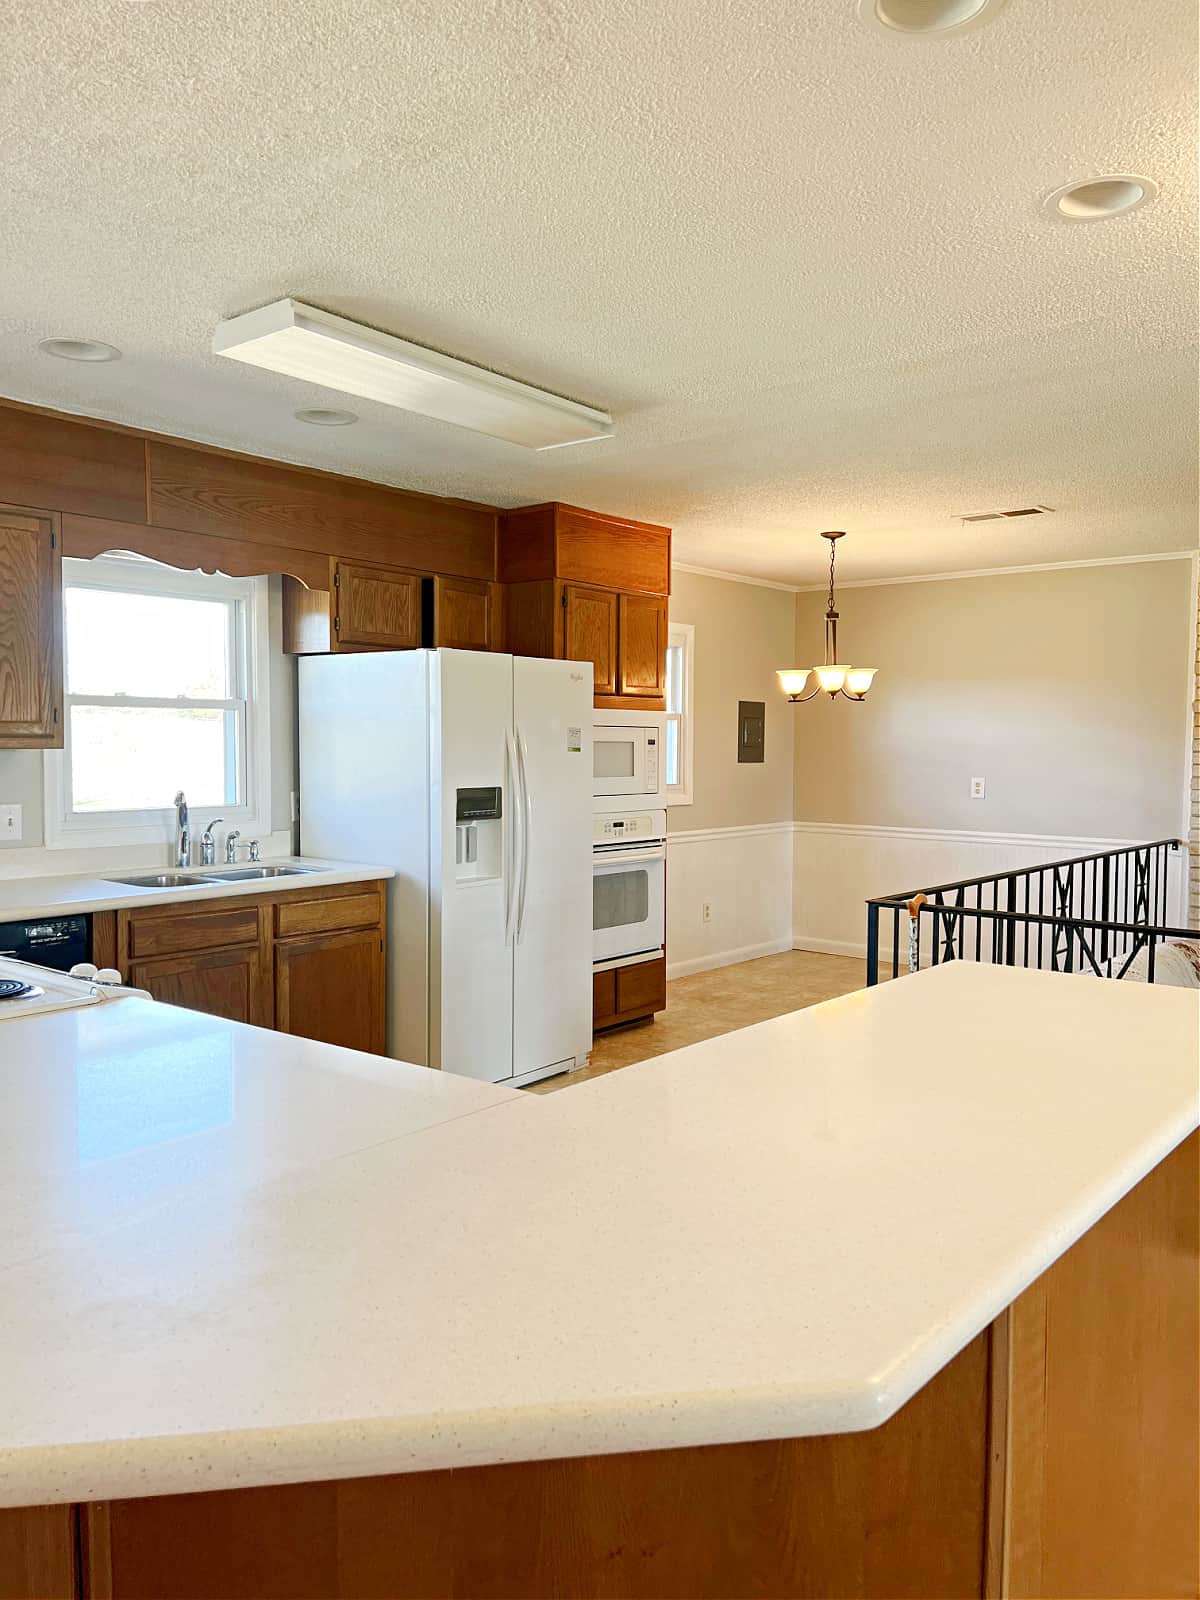 view of kitchen with oak cabinets and white countertops